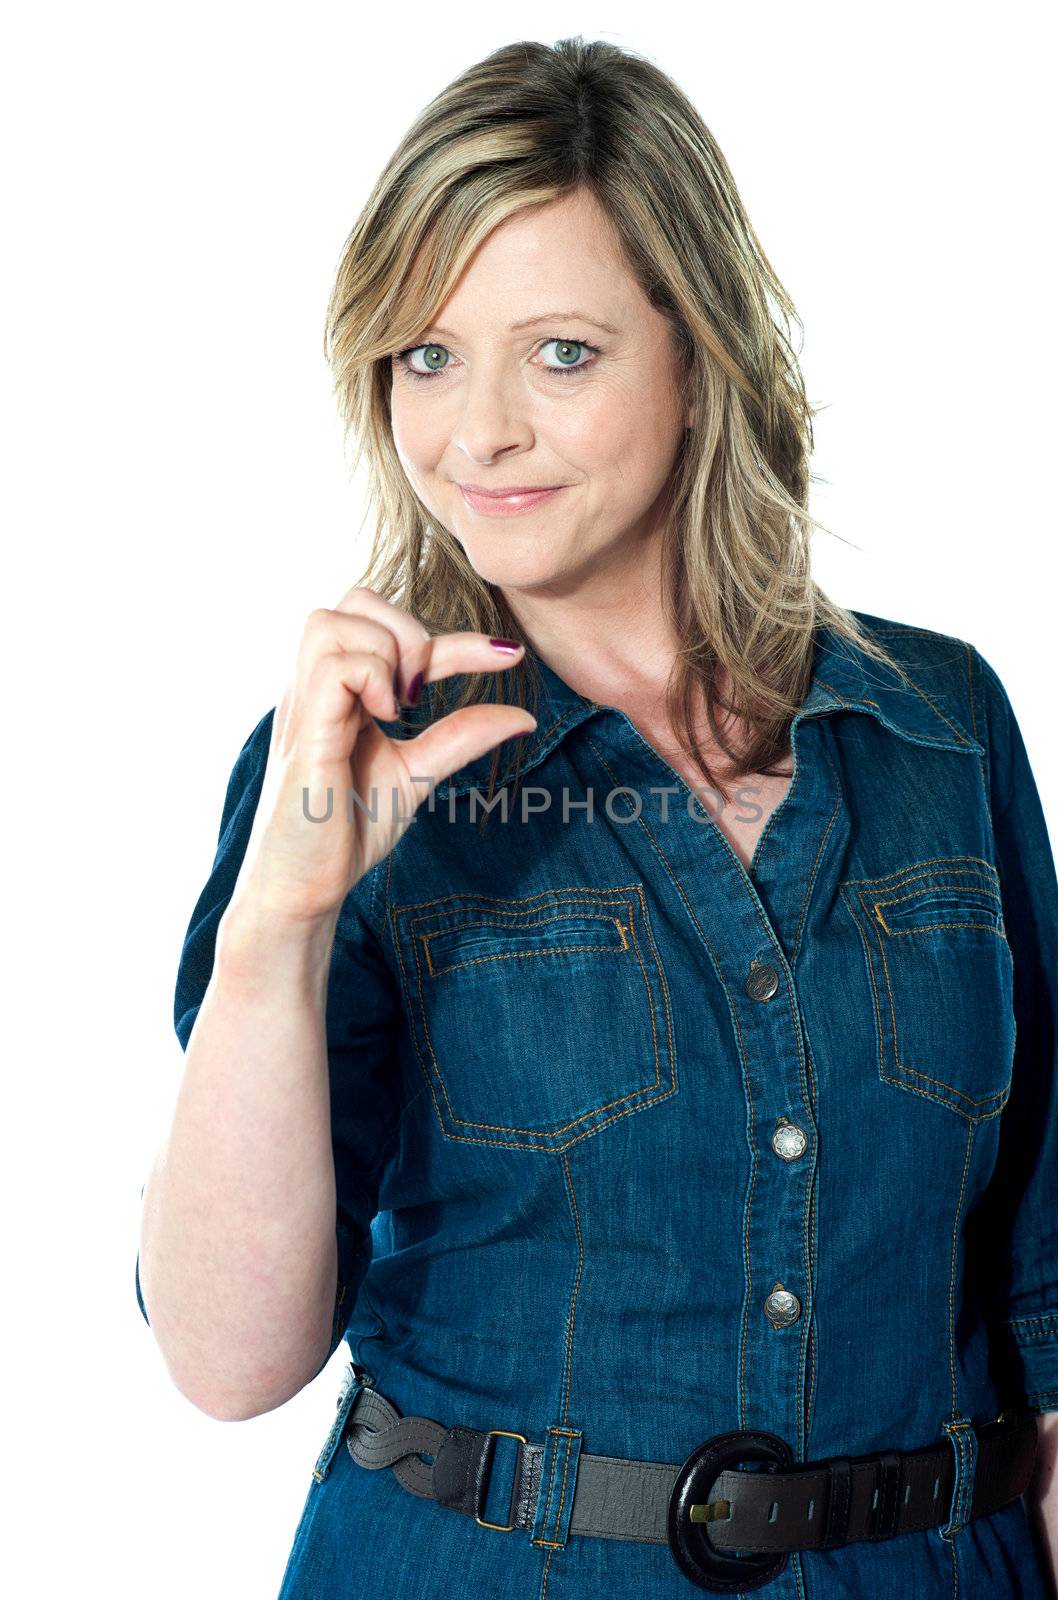 Female indicating little bit gesture against white background